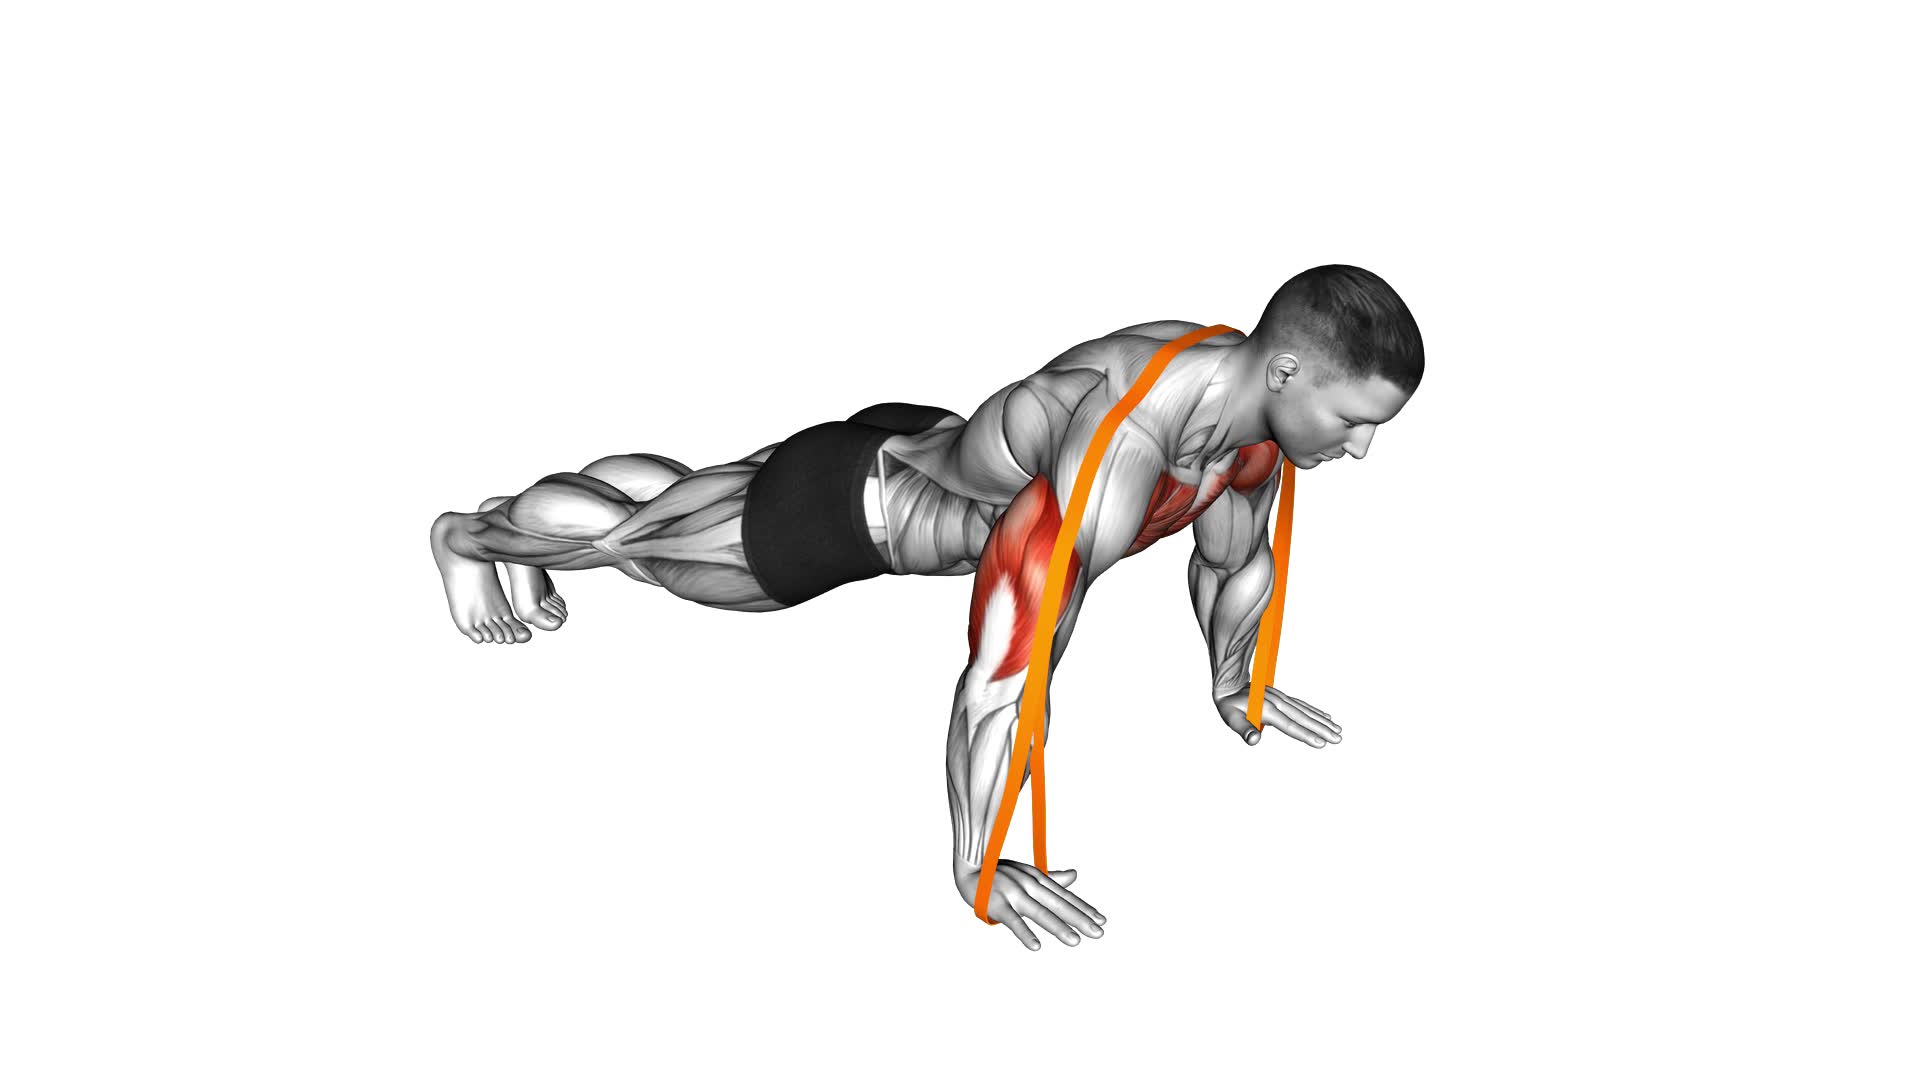 Resistance Band Push-Up - Video Exercise Guide & Tips